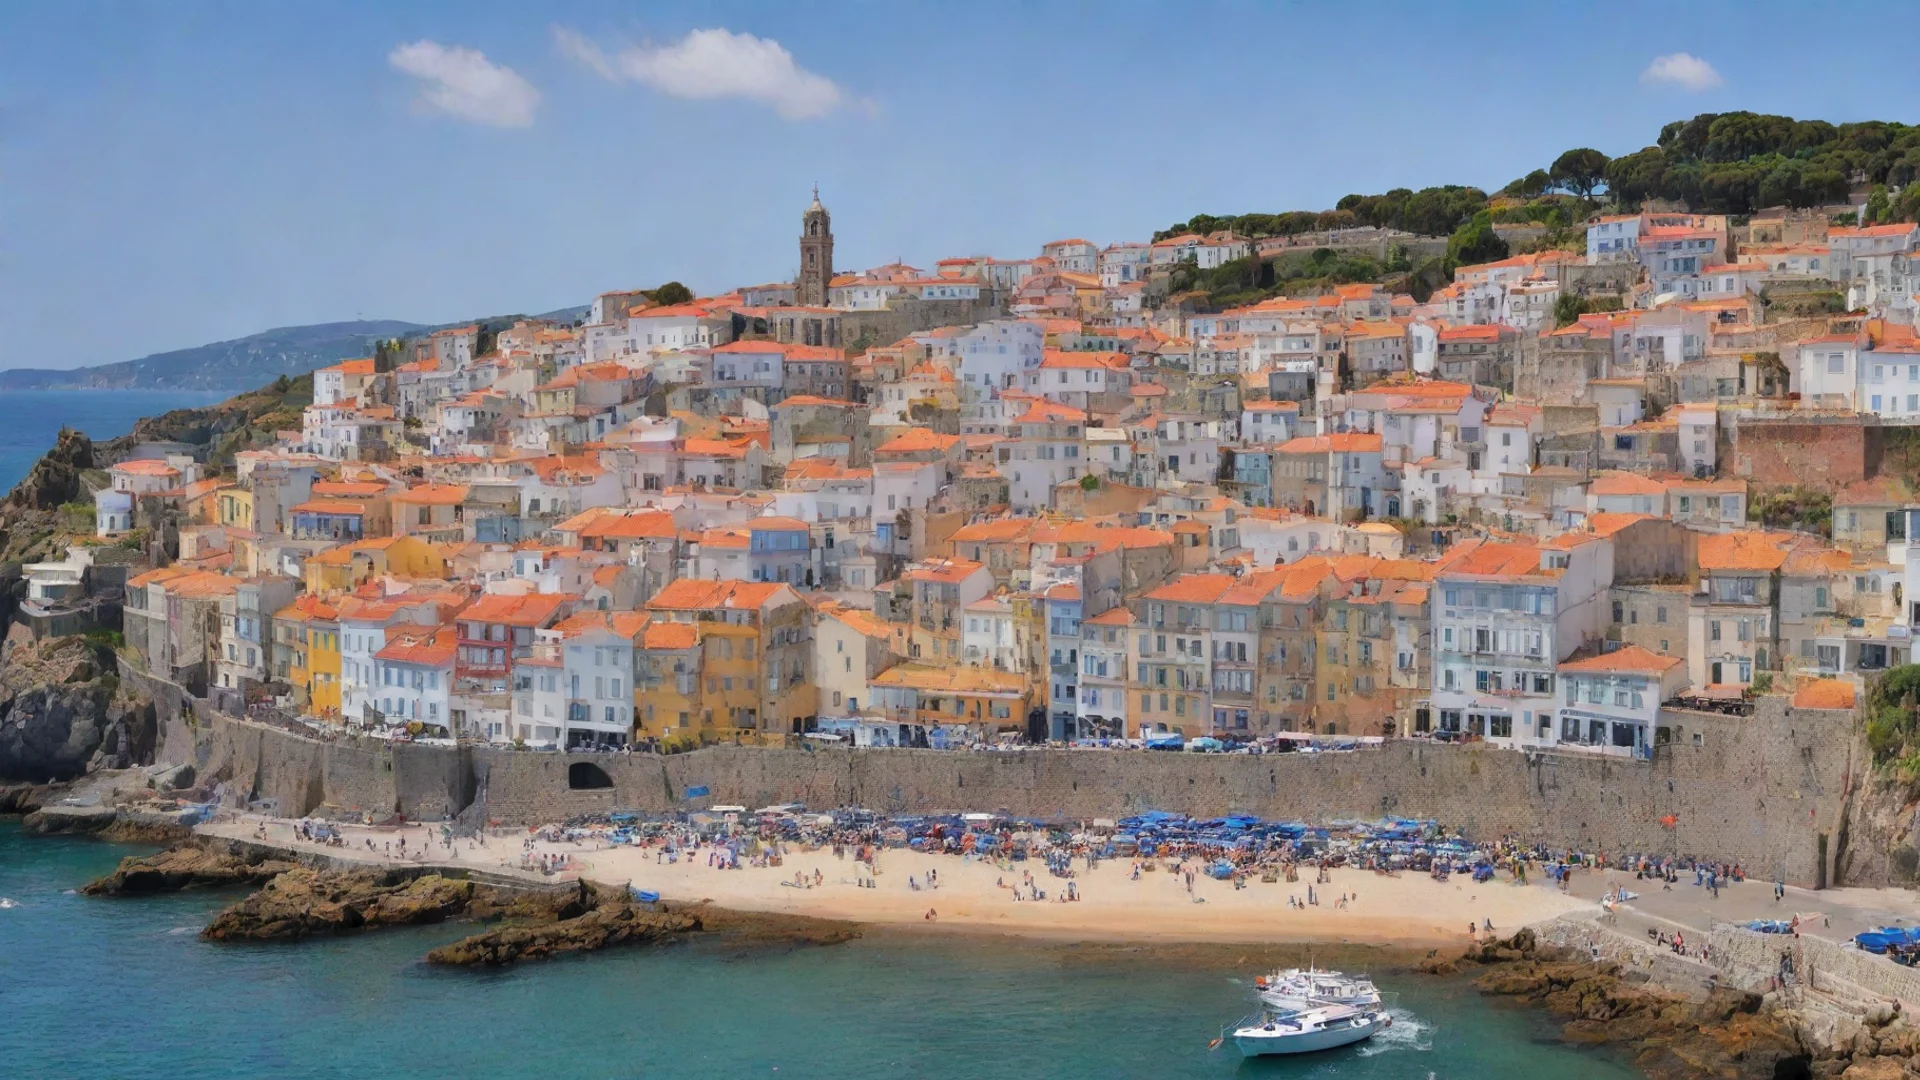 amazing busy portuguese coastal town hd aesthetic best quality with strong vibrant colors awesome portrait 2 wide